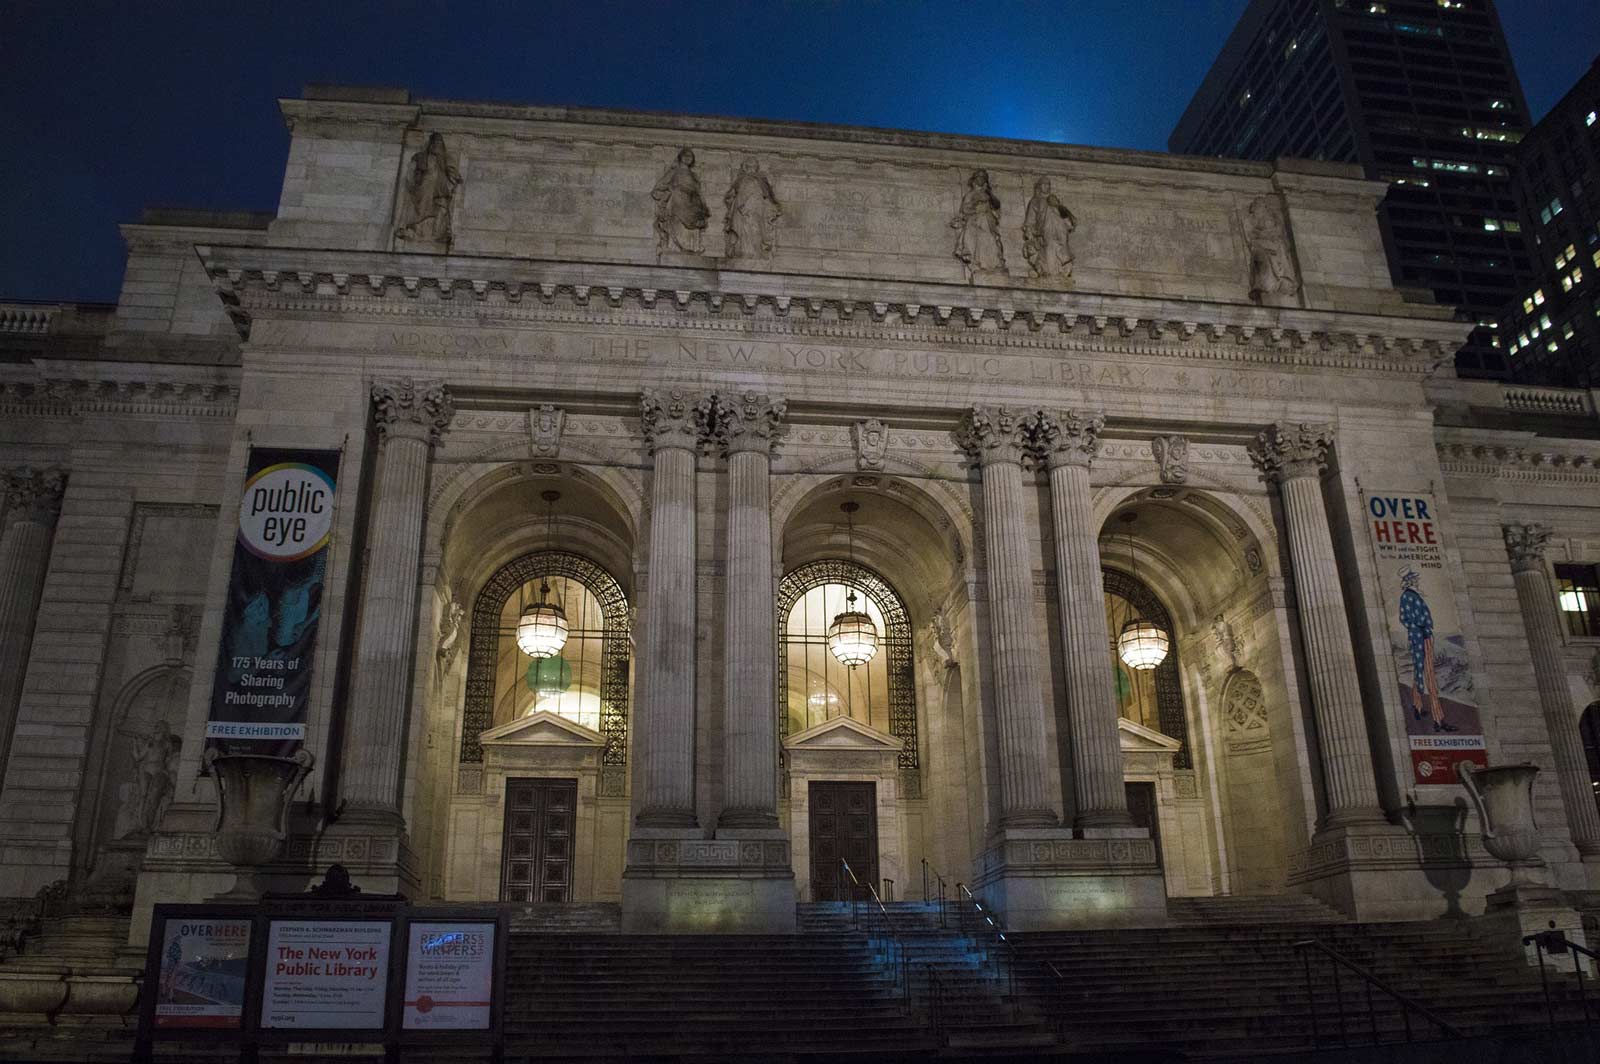 the New York Public Library